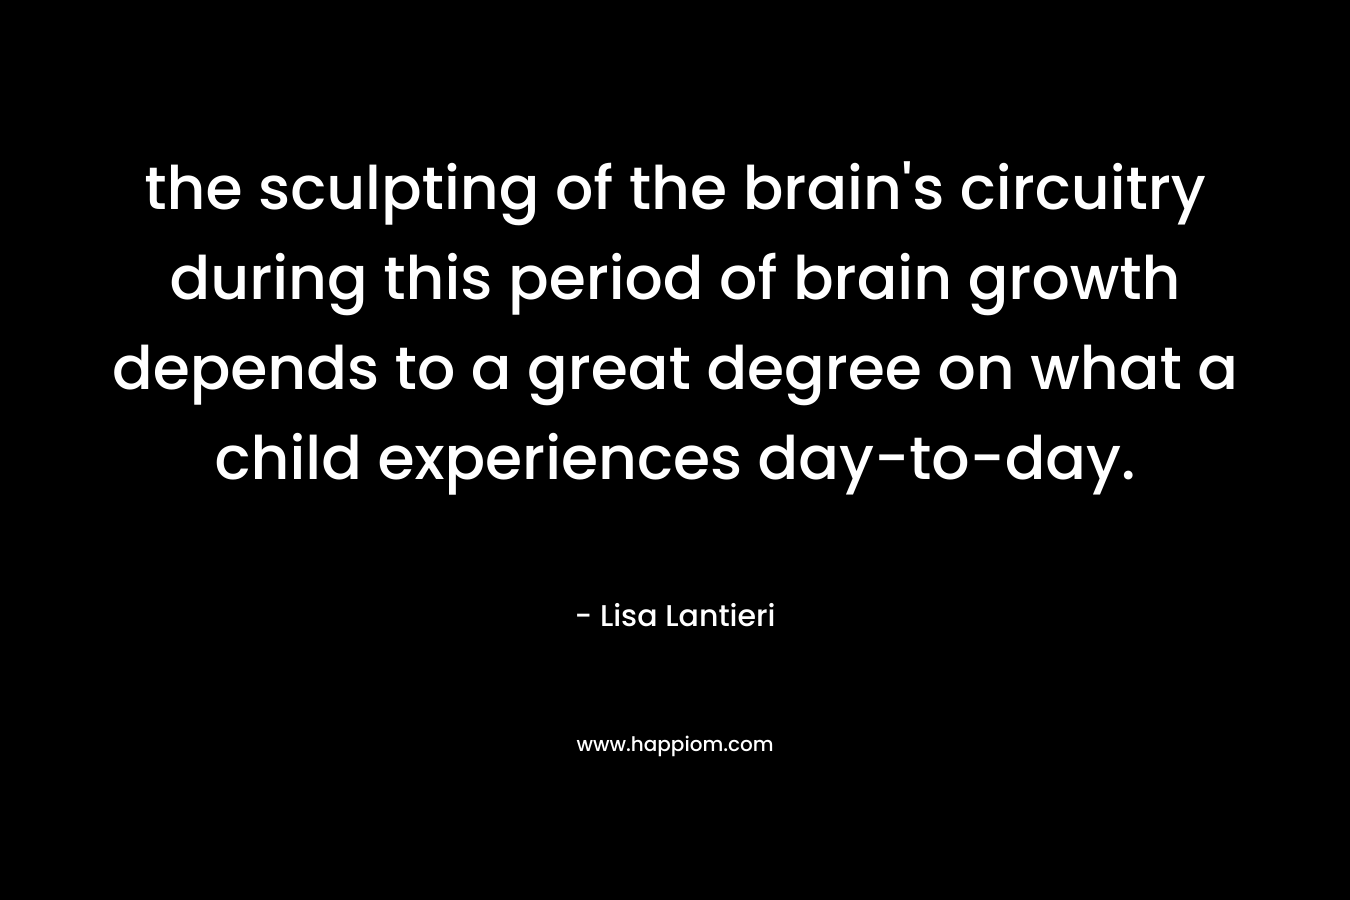 the sculpting of the brain’s circuitry during this period of brain growth depends to a great degree on what a child experiences day-to-day. – Lisa Lantieri